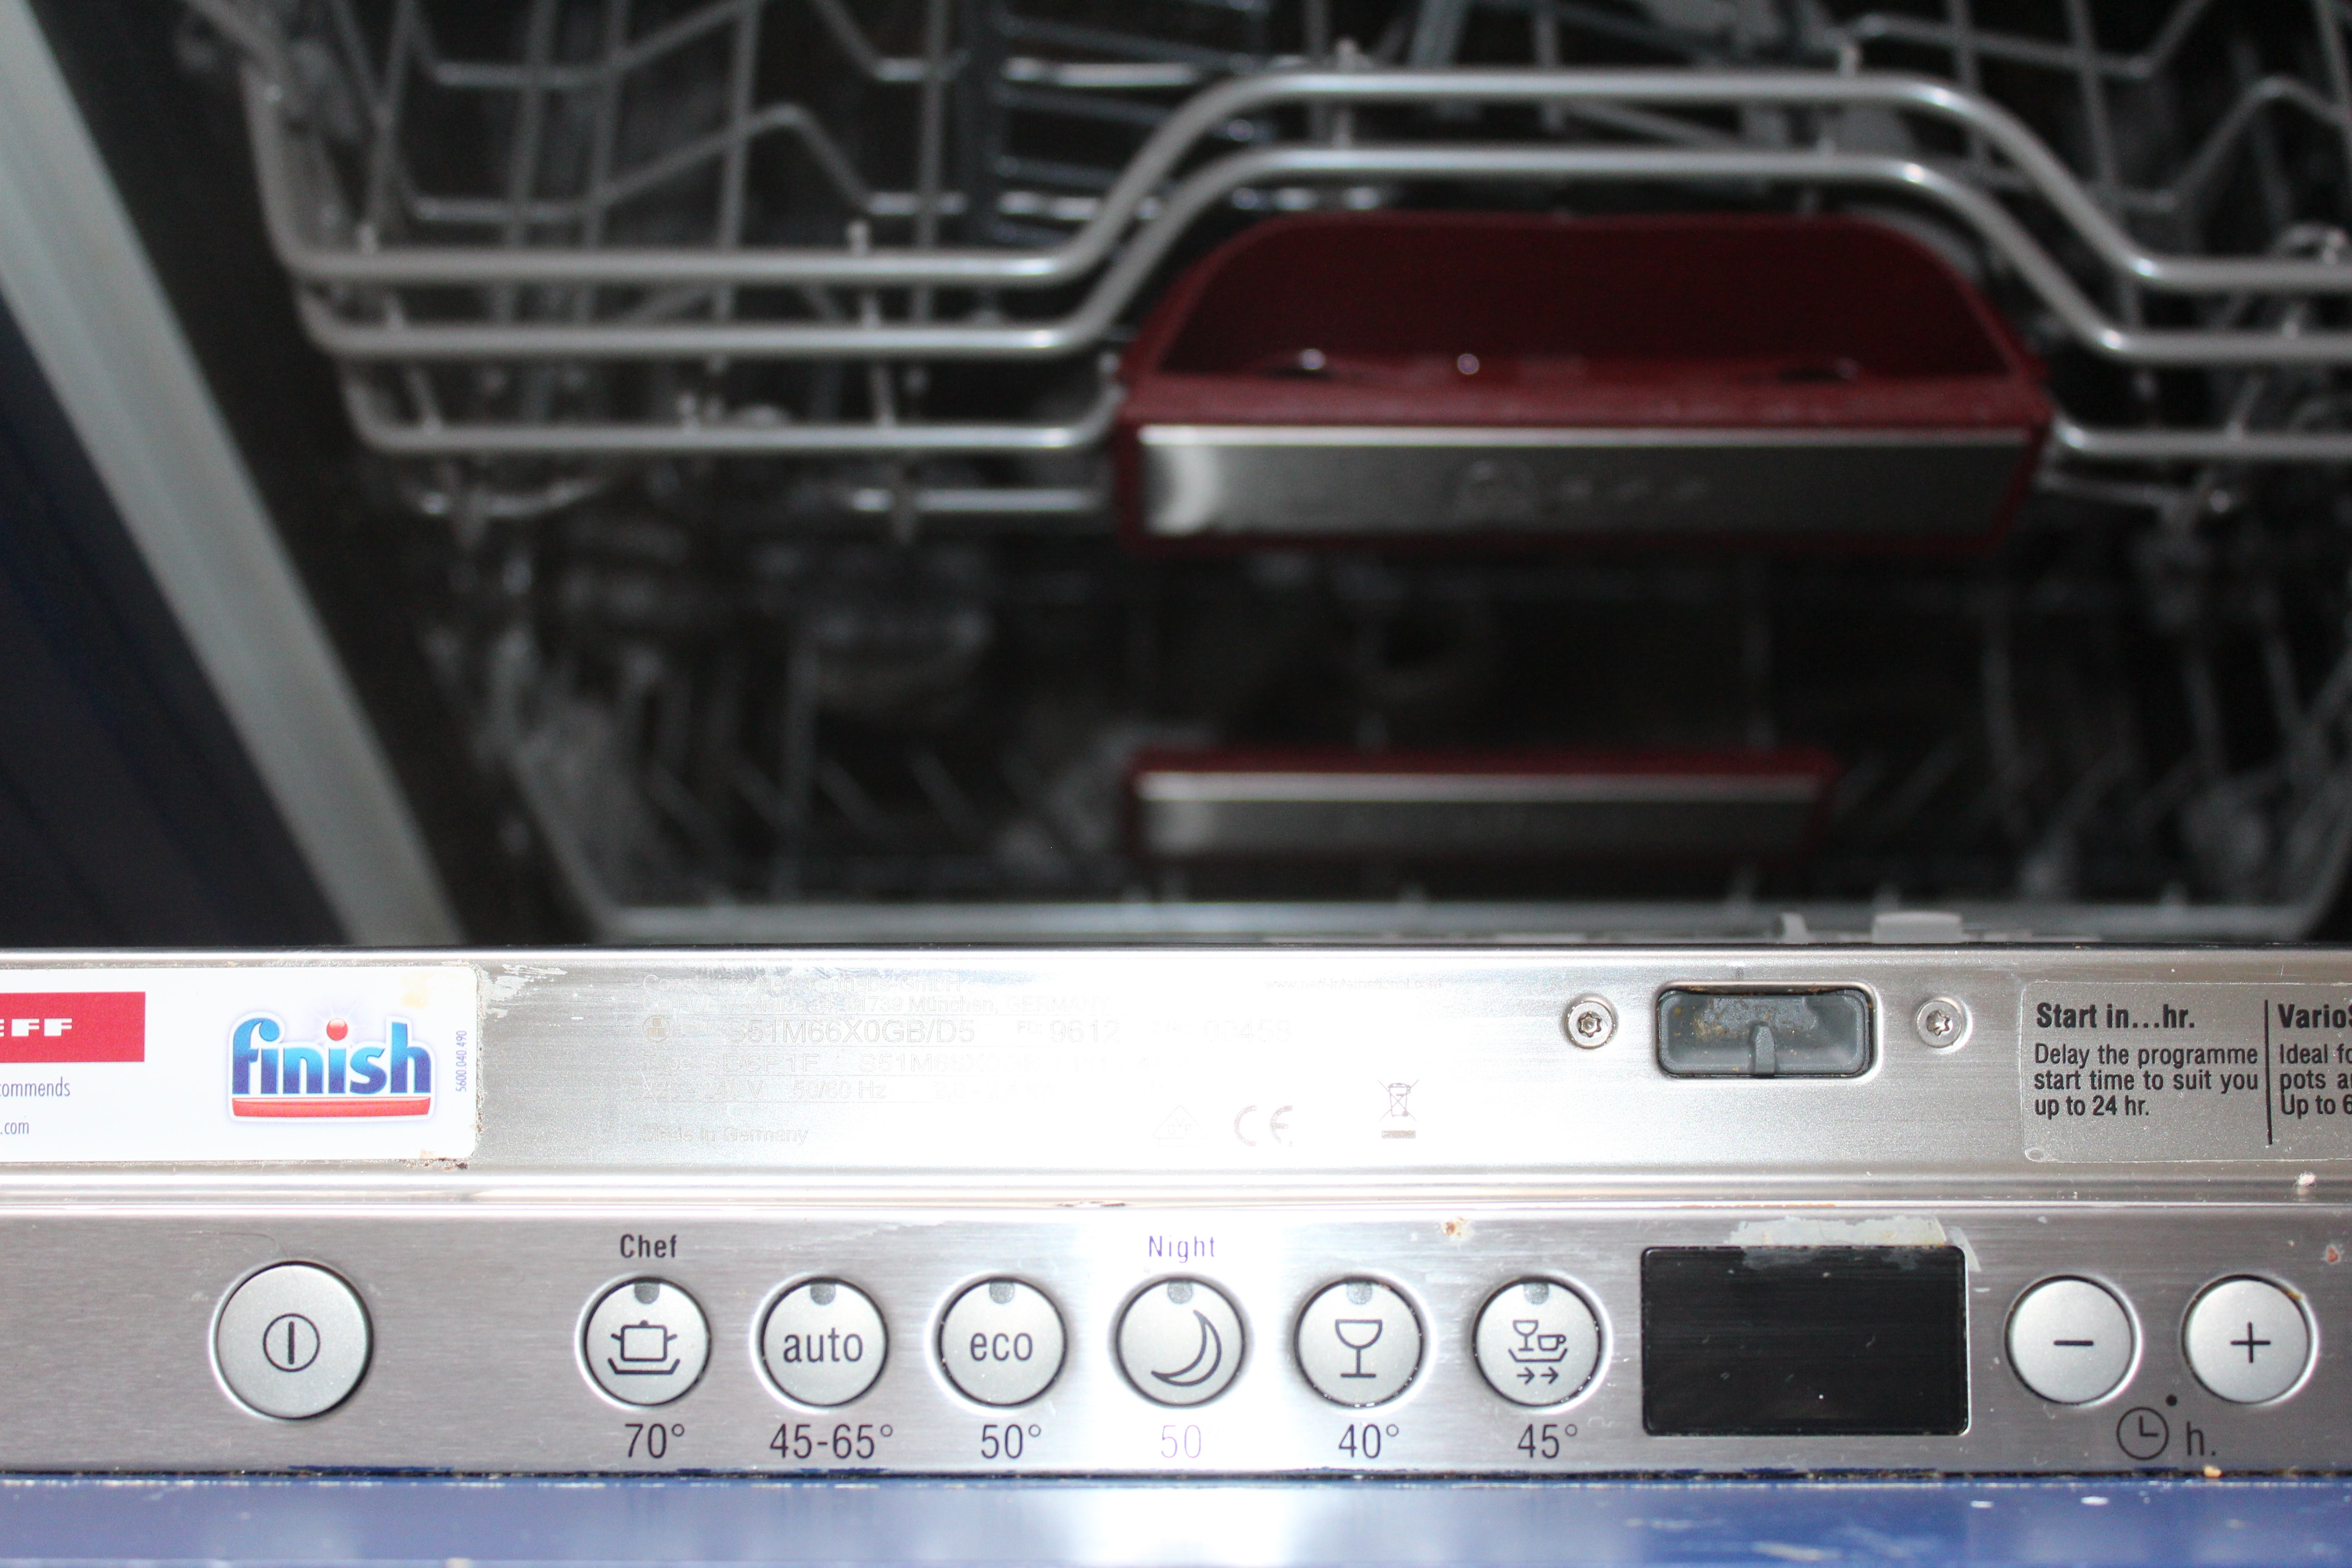 How to use a dishwasher